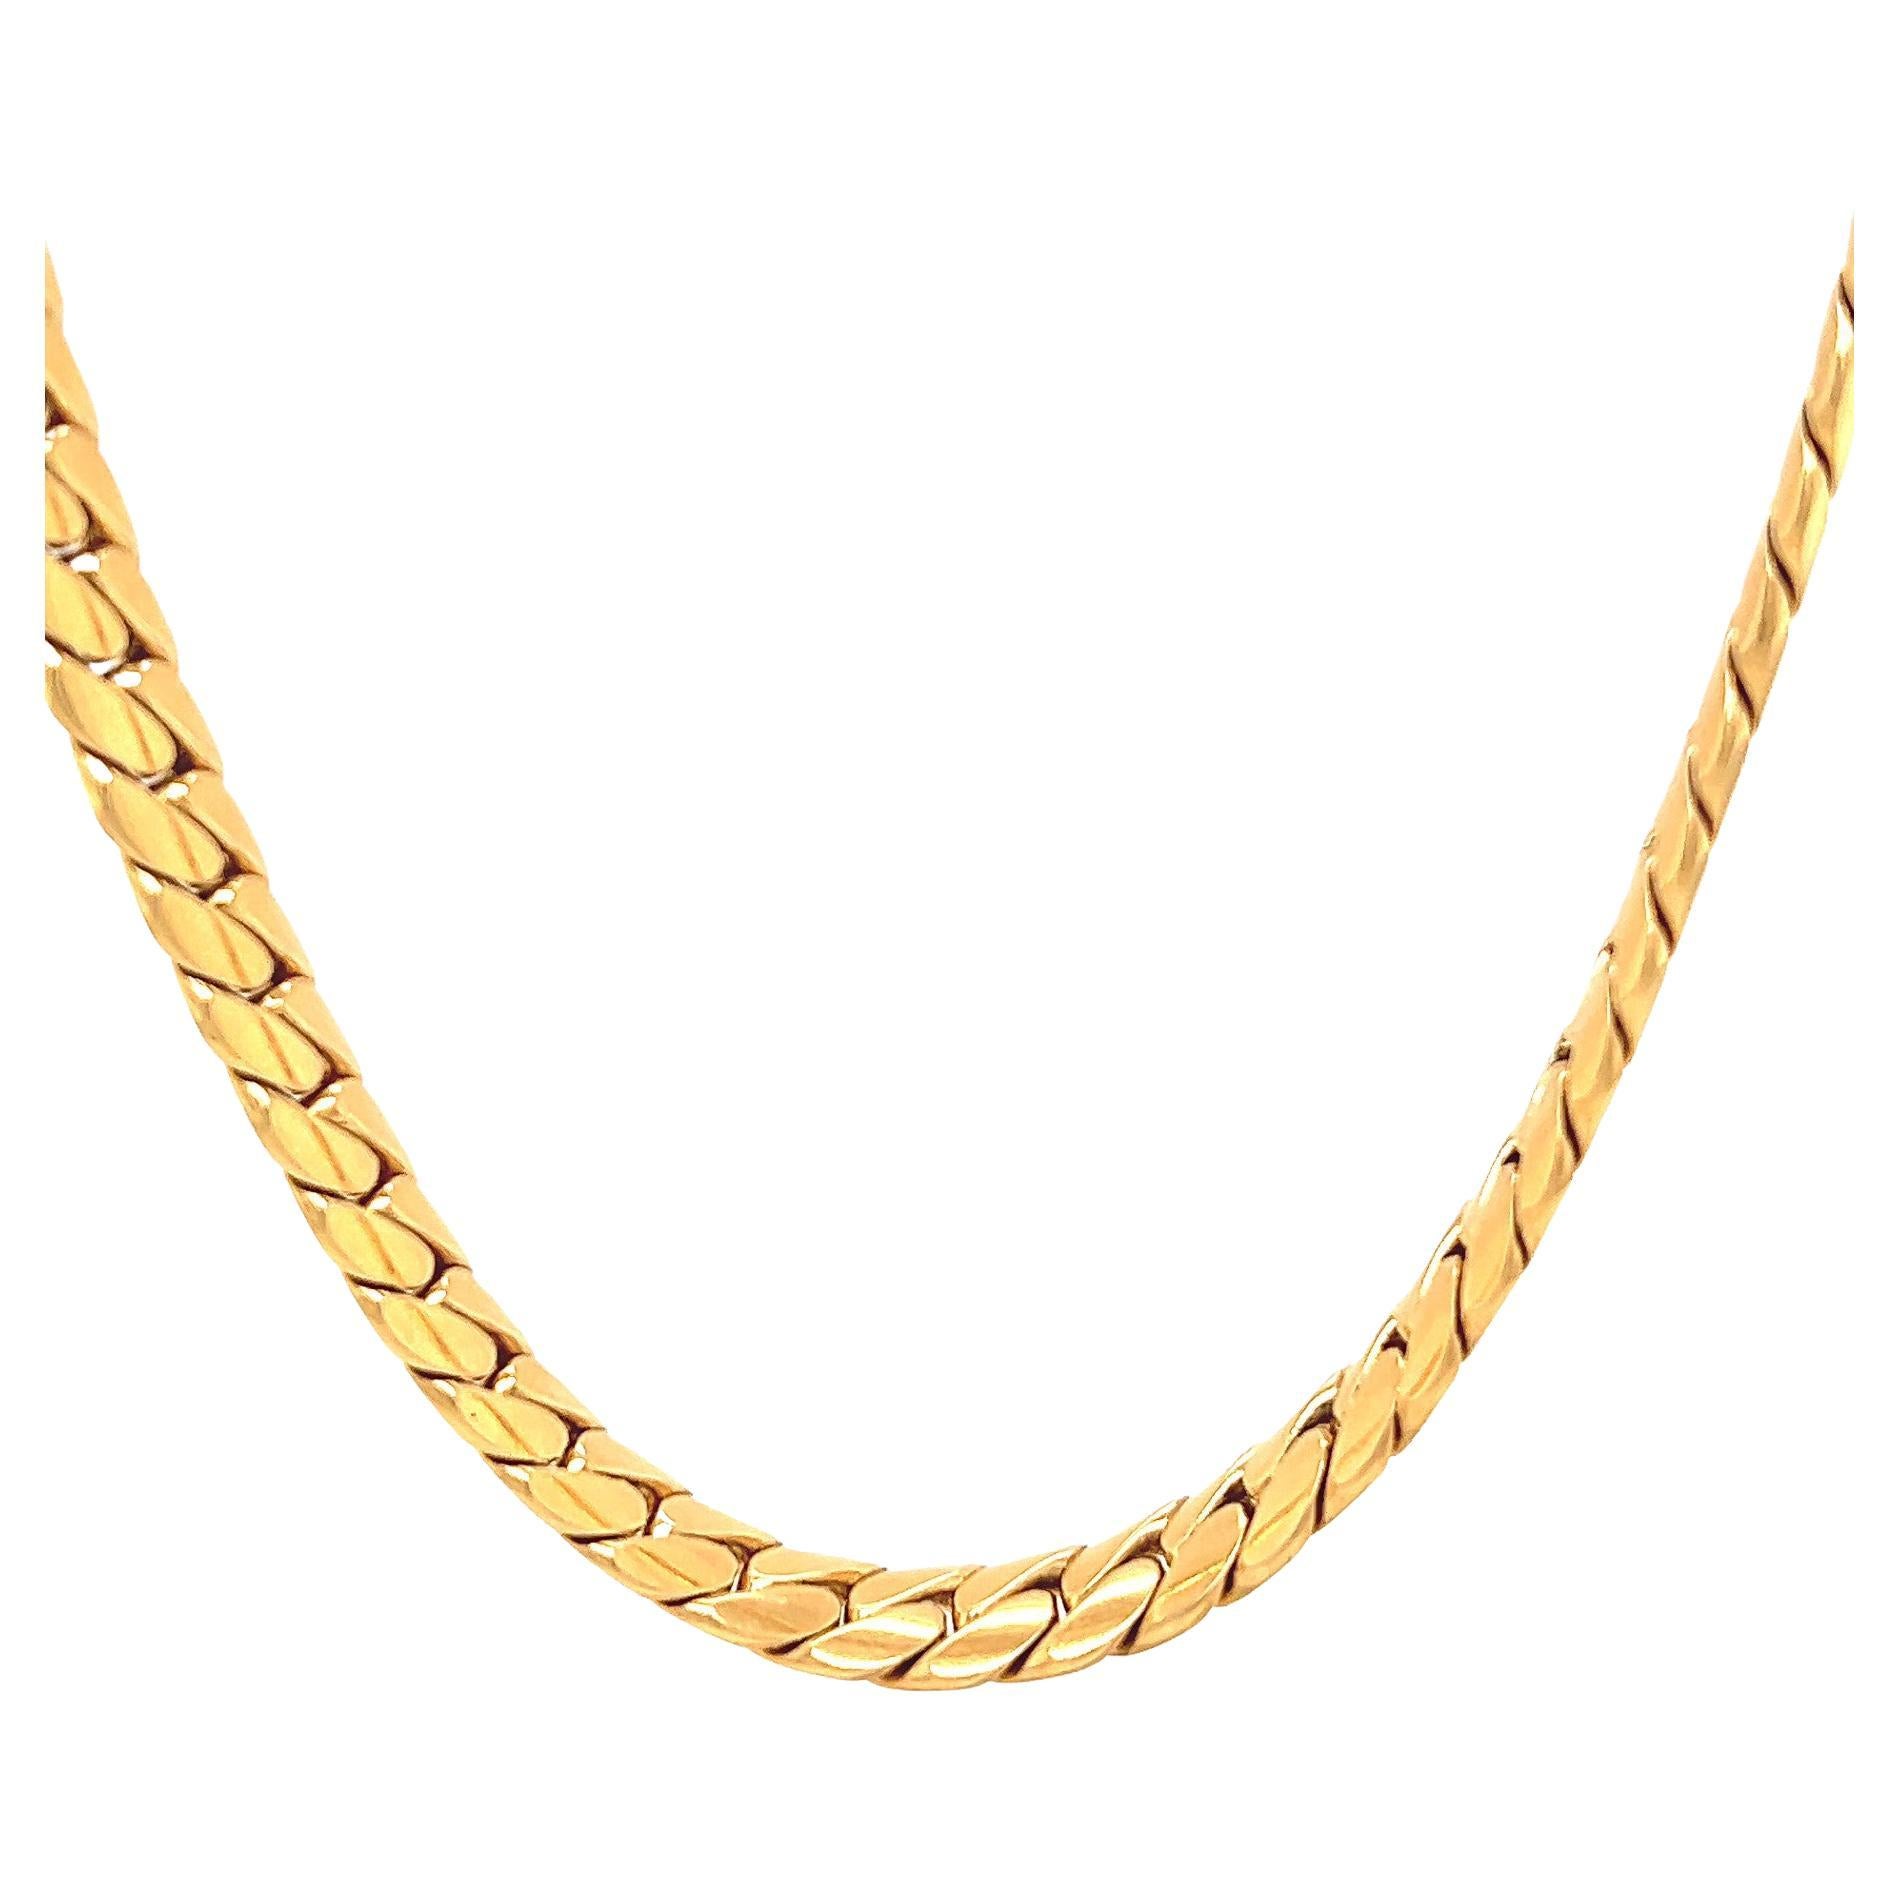 Vintage Cartier French 18 Karat Yellow Gold Flat Curb Link Necklace